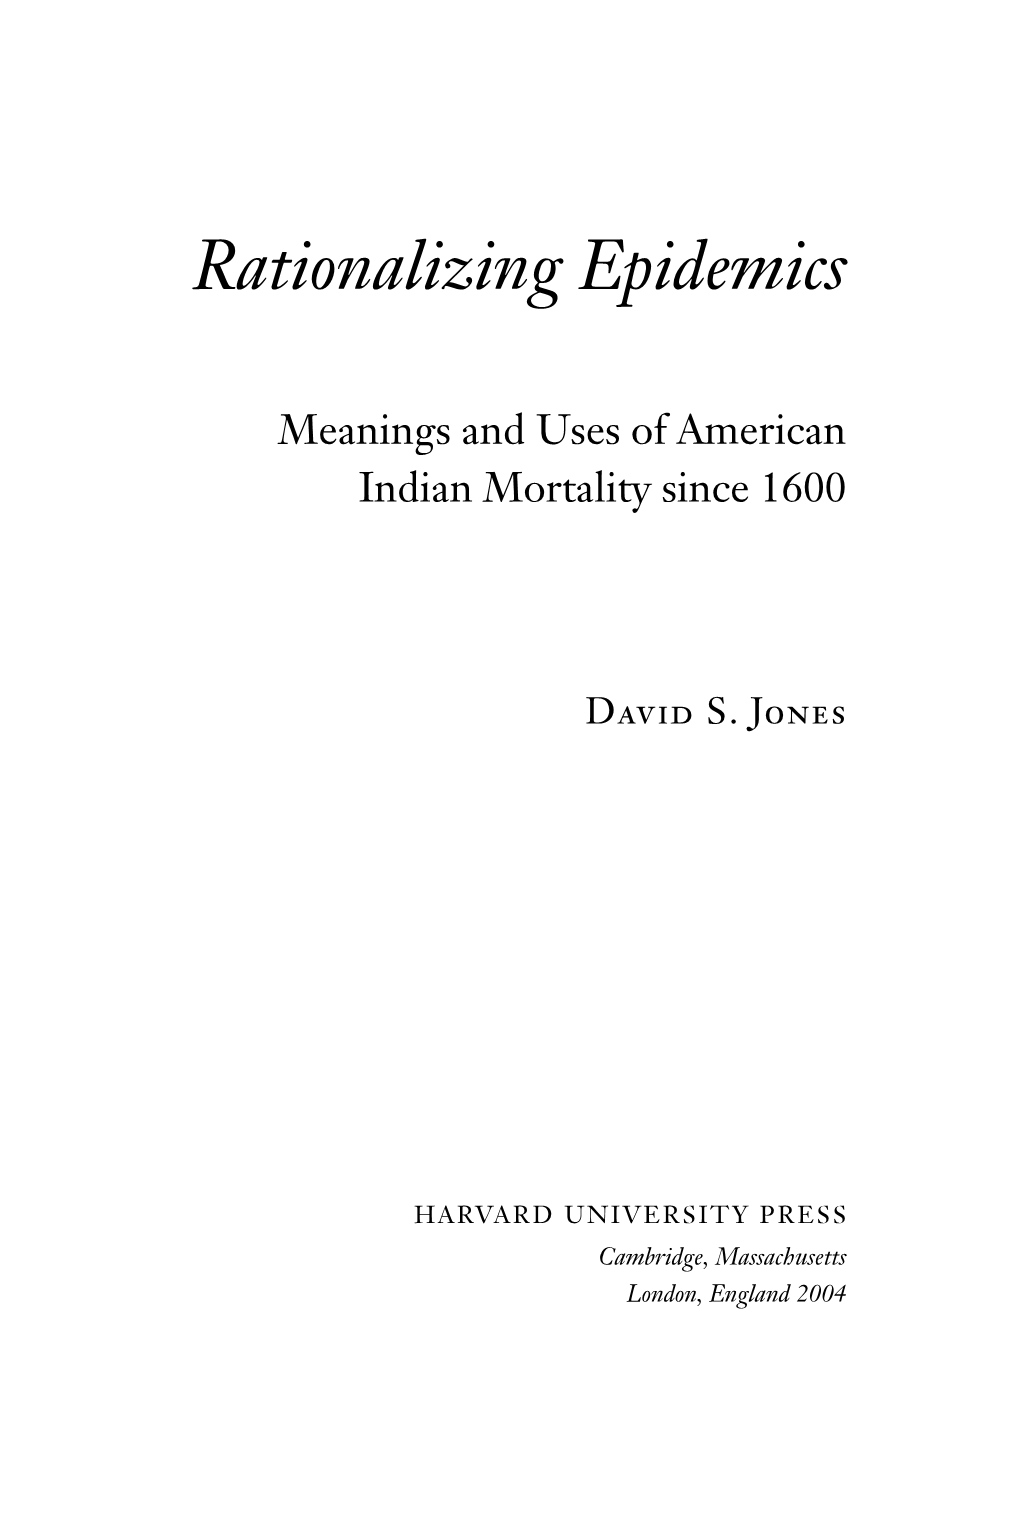 Rationalizing Epidemics: Meanings and Uses of American Indian